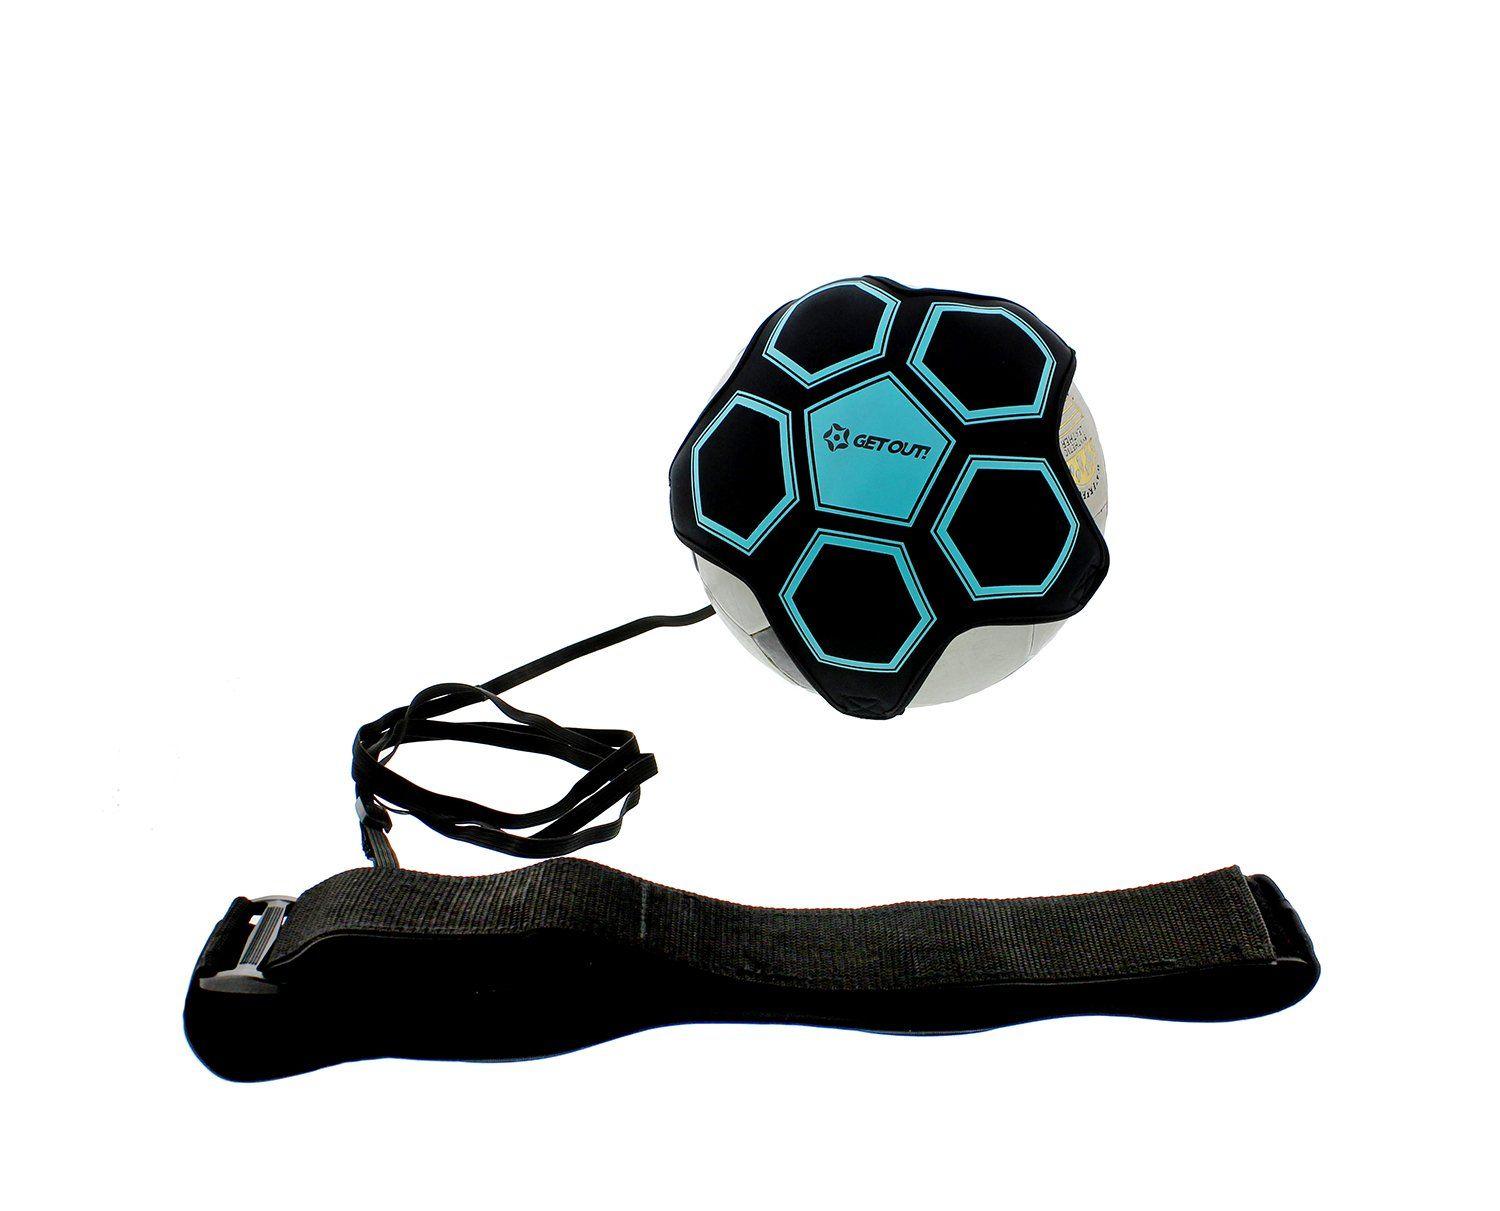 Shoe Kicking Soccer Ball Logo - Amazon.com : Get Out! Soccer/Football Kick Trainer - Practice Aid ...